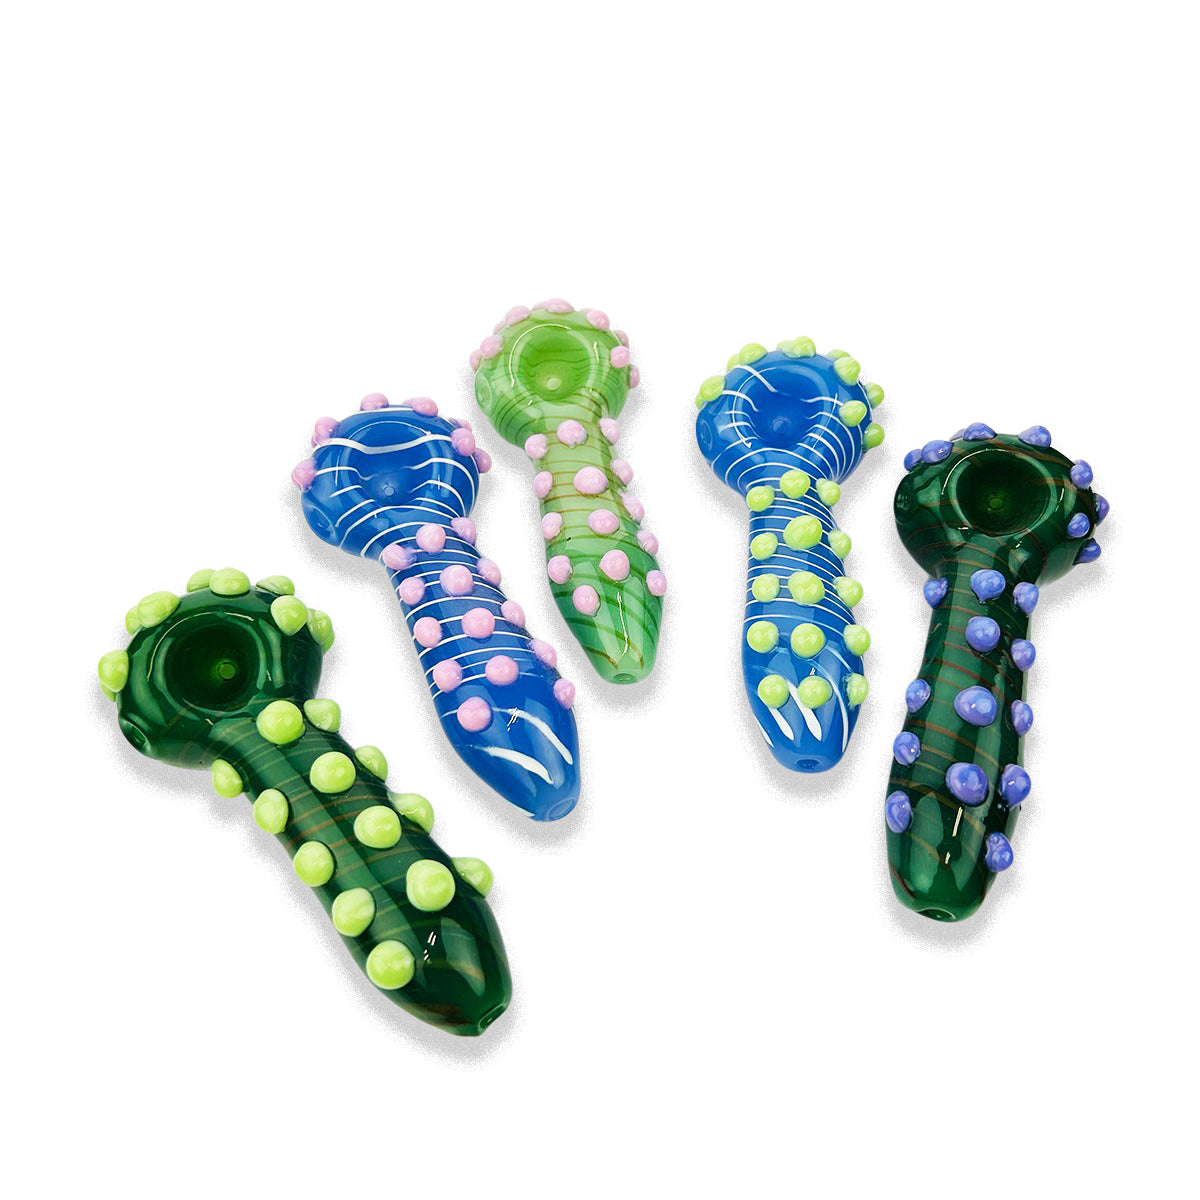 4.5" Hand Pipe Spoon Slime Knockers with Swirling Art